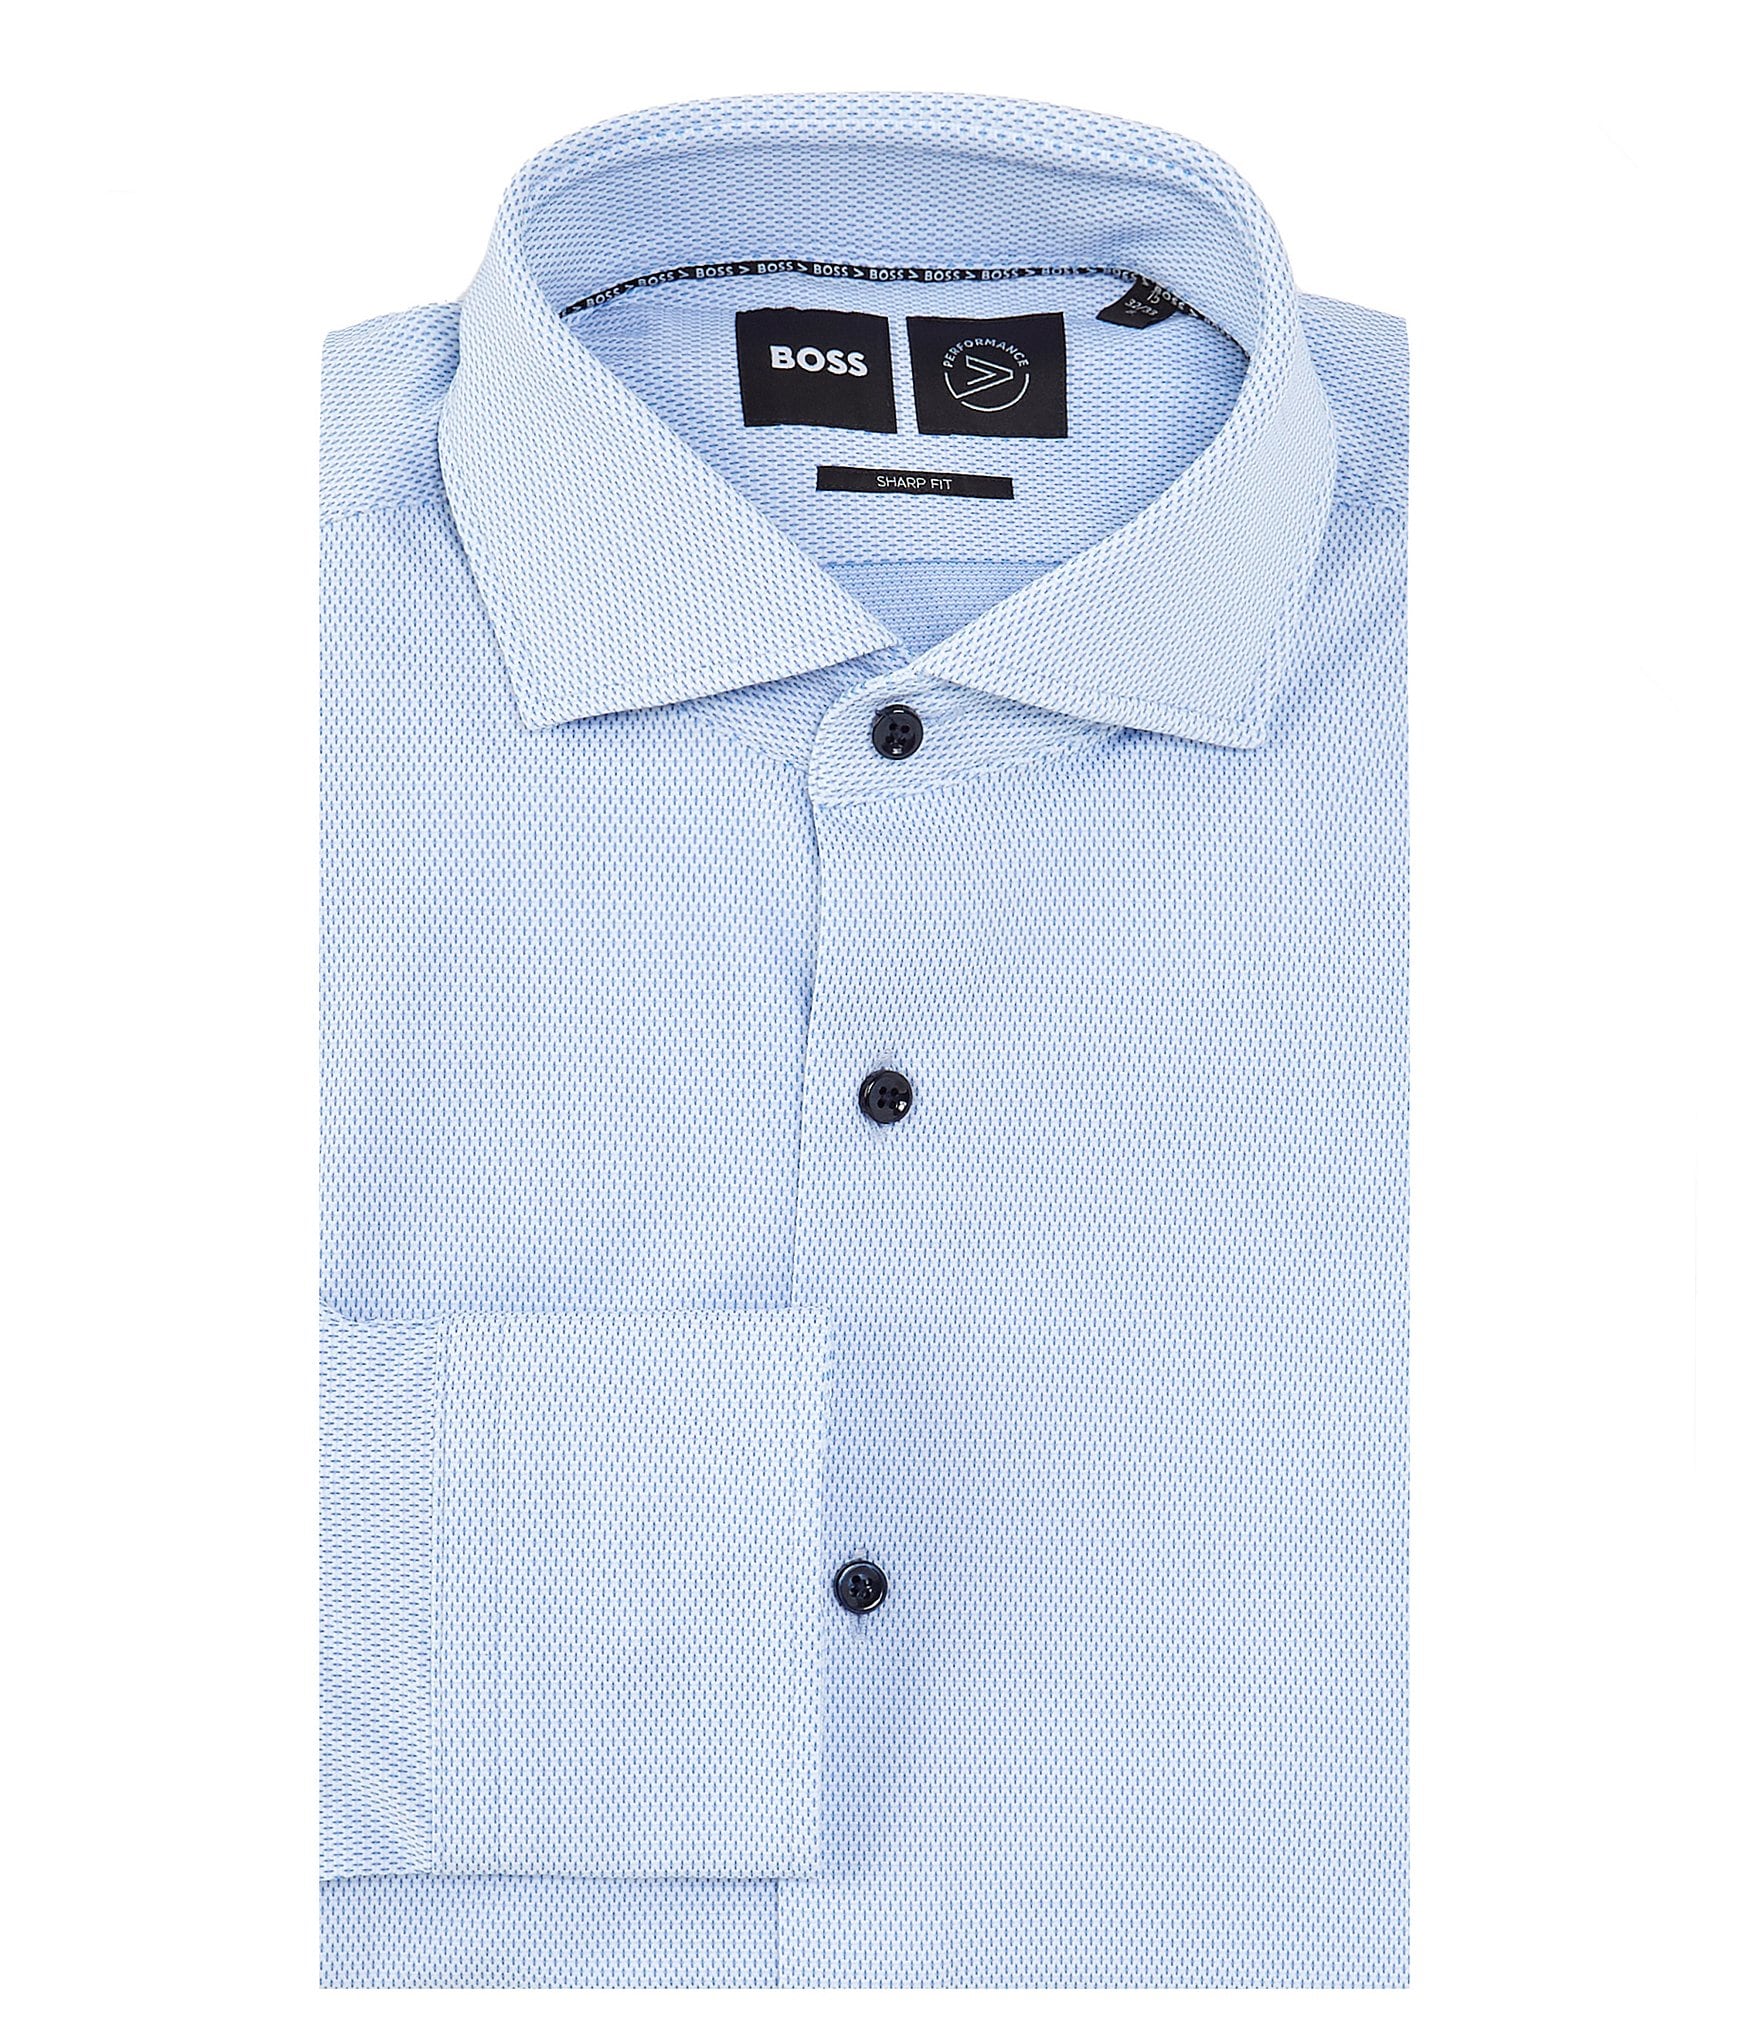 5 Different Ways to Wear a Dress Shirt Casually, Olymp Shirts